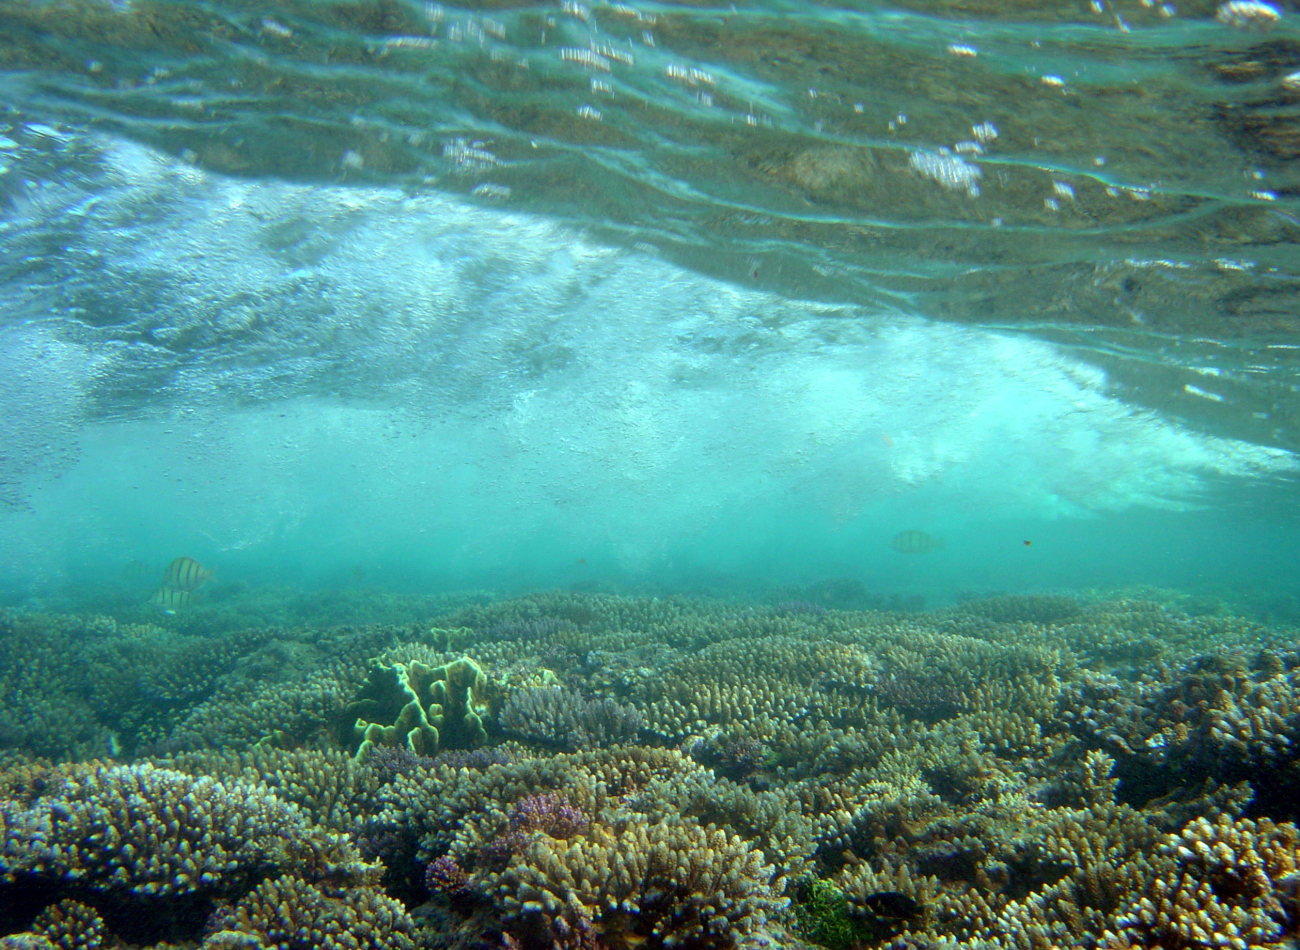 Shallow reef with breaking wave as seen from below